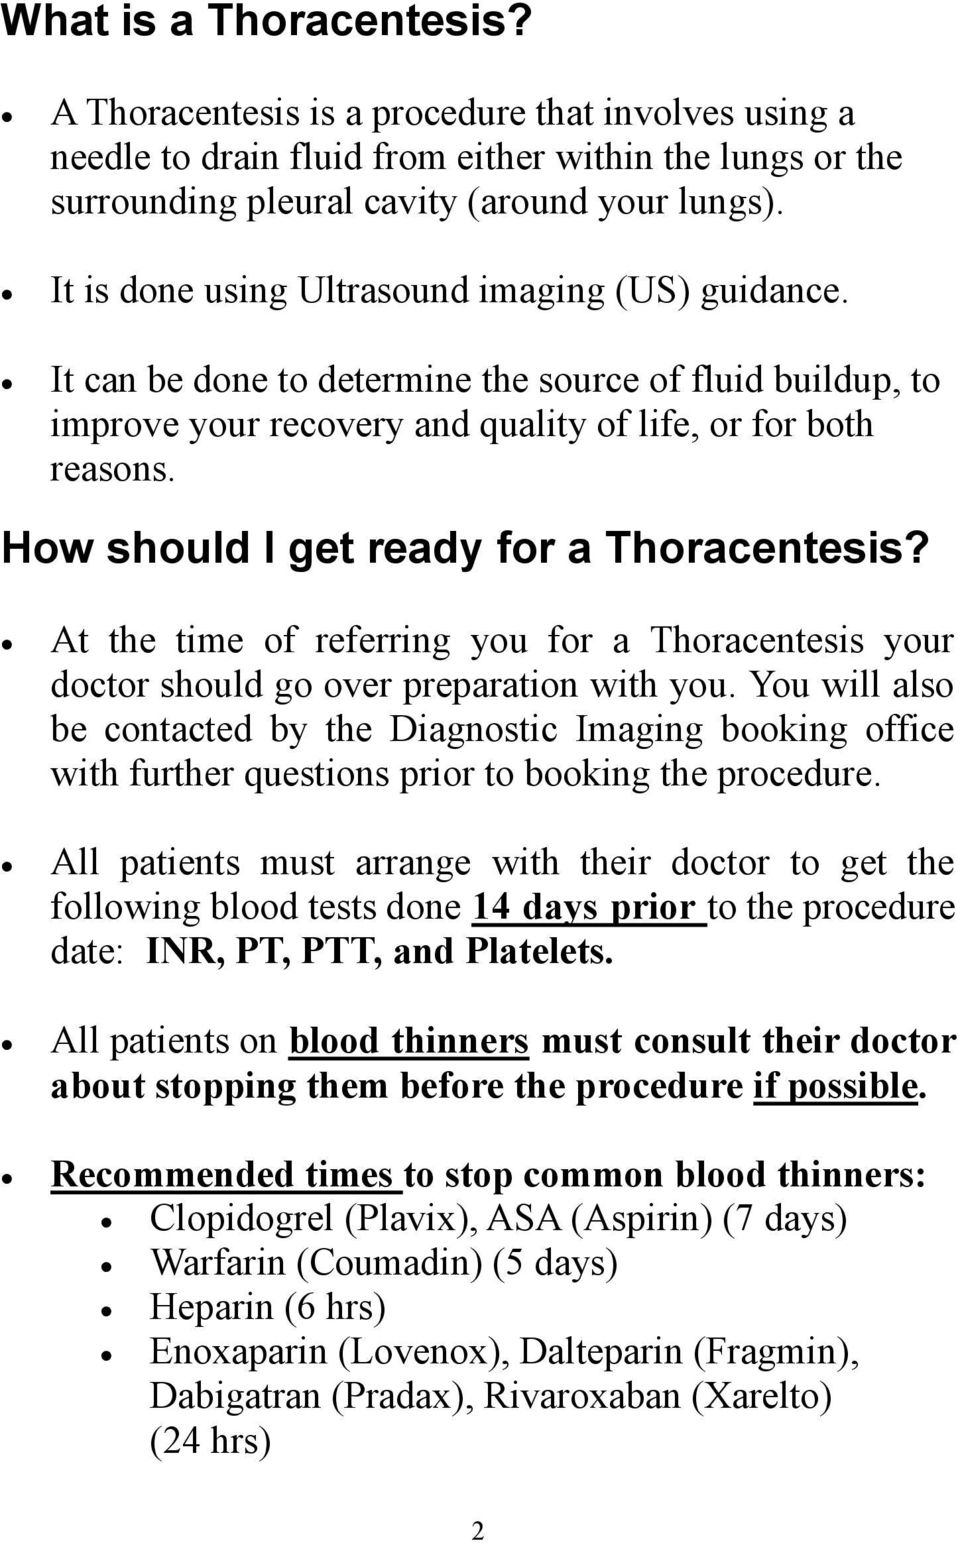 How should I get ready for a Thoracentesis? At the time of referring you for a Thoracentesis your doctor should go over preparation with you.